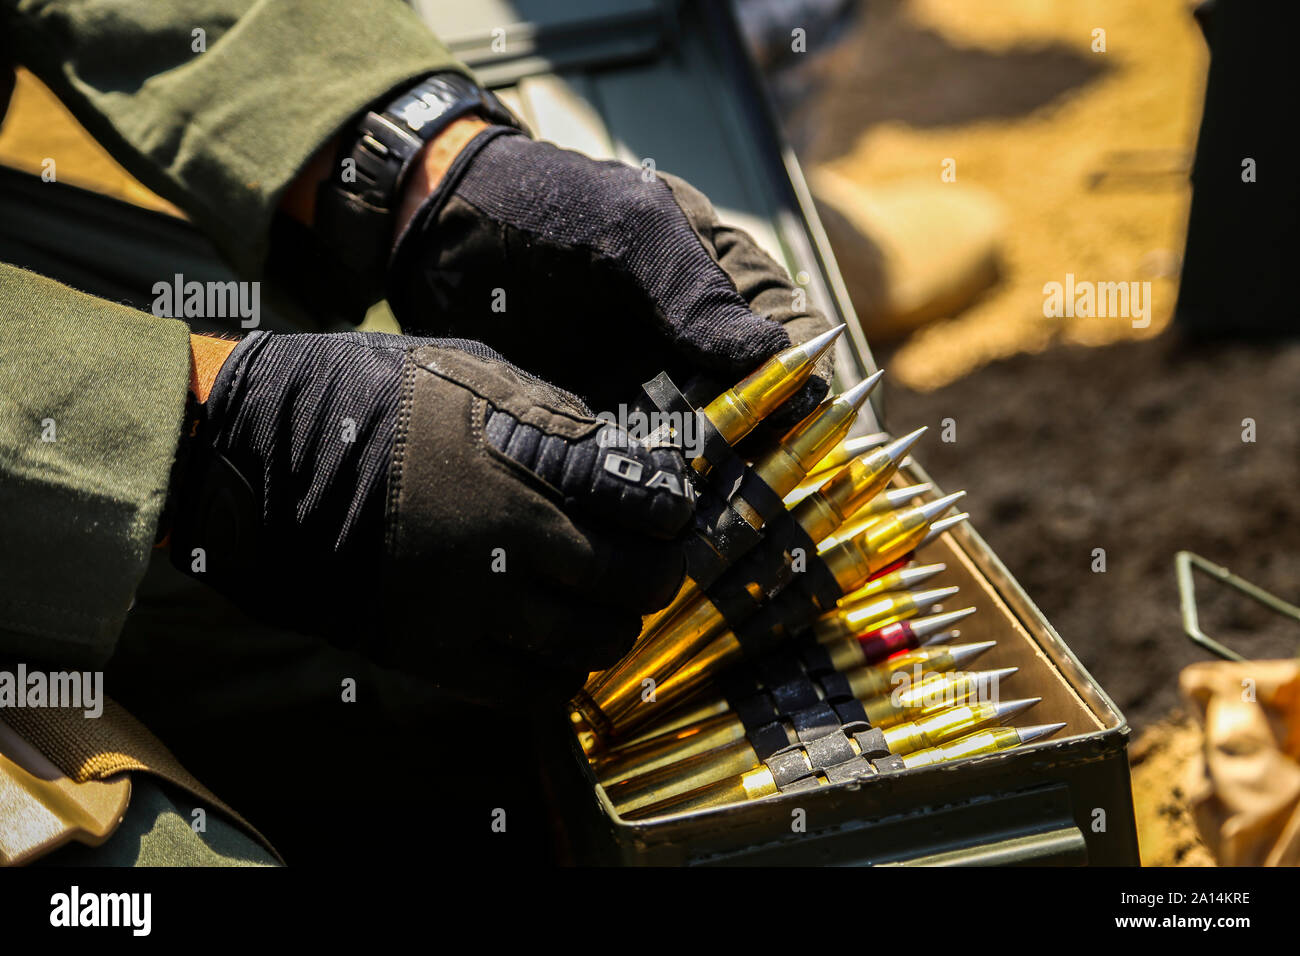 A Marine Explosive Ordnance Disposal technician prepares to stage .50 Caliber rounds. Stock Photo